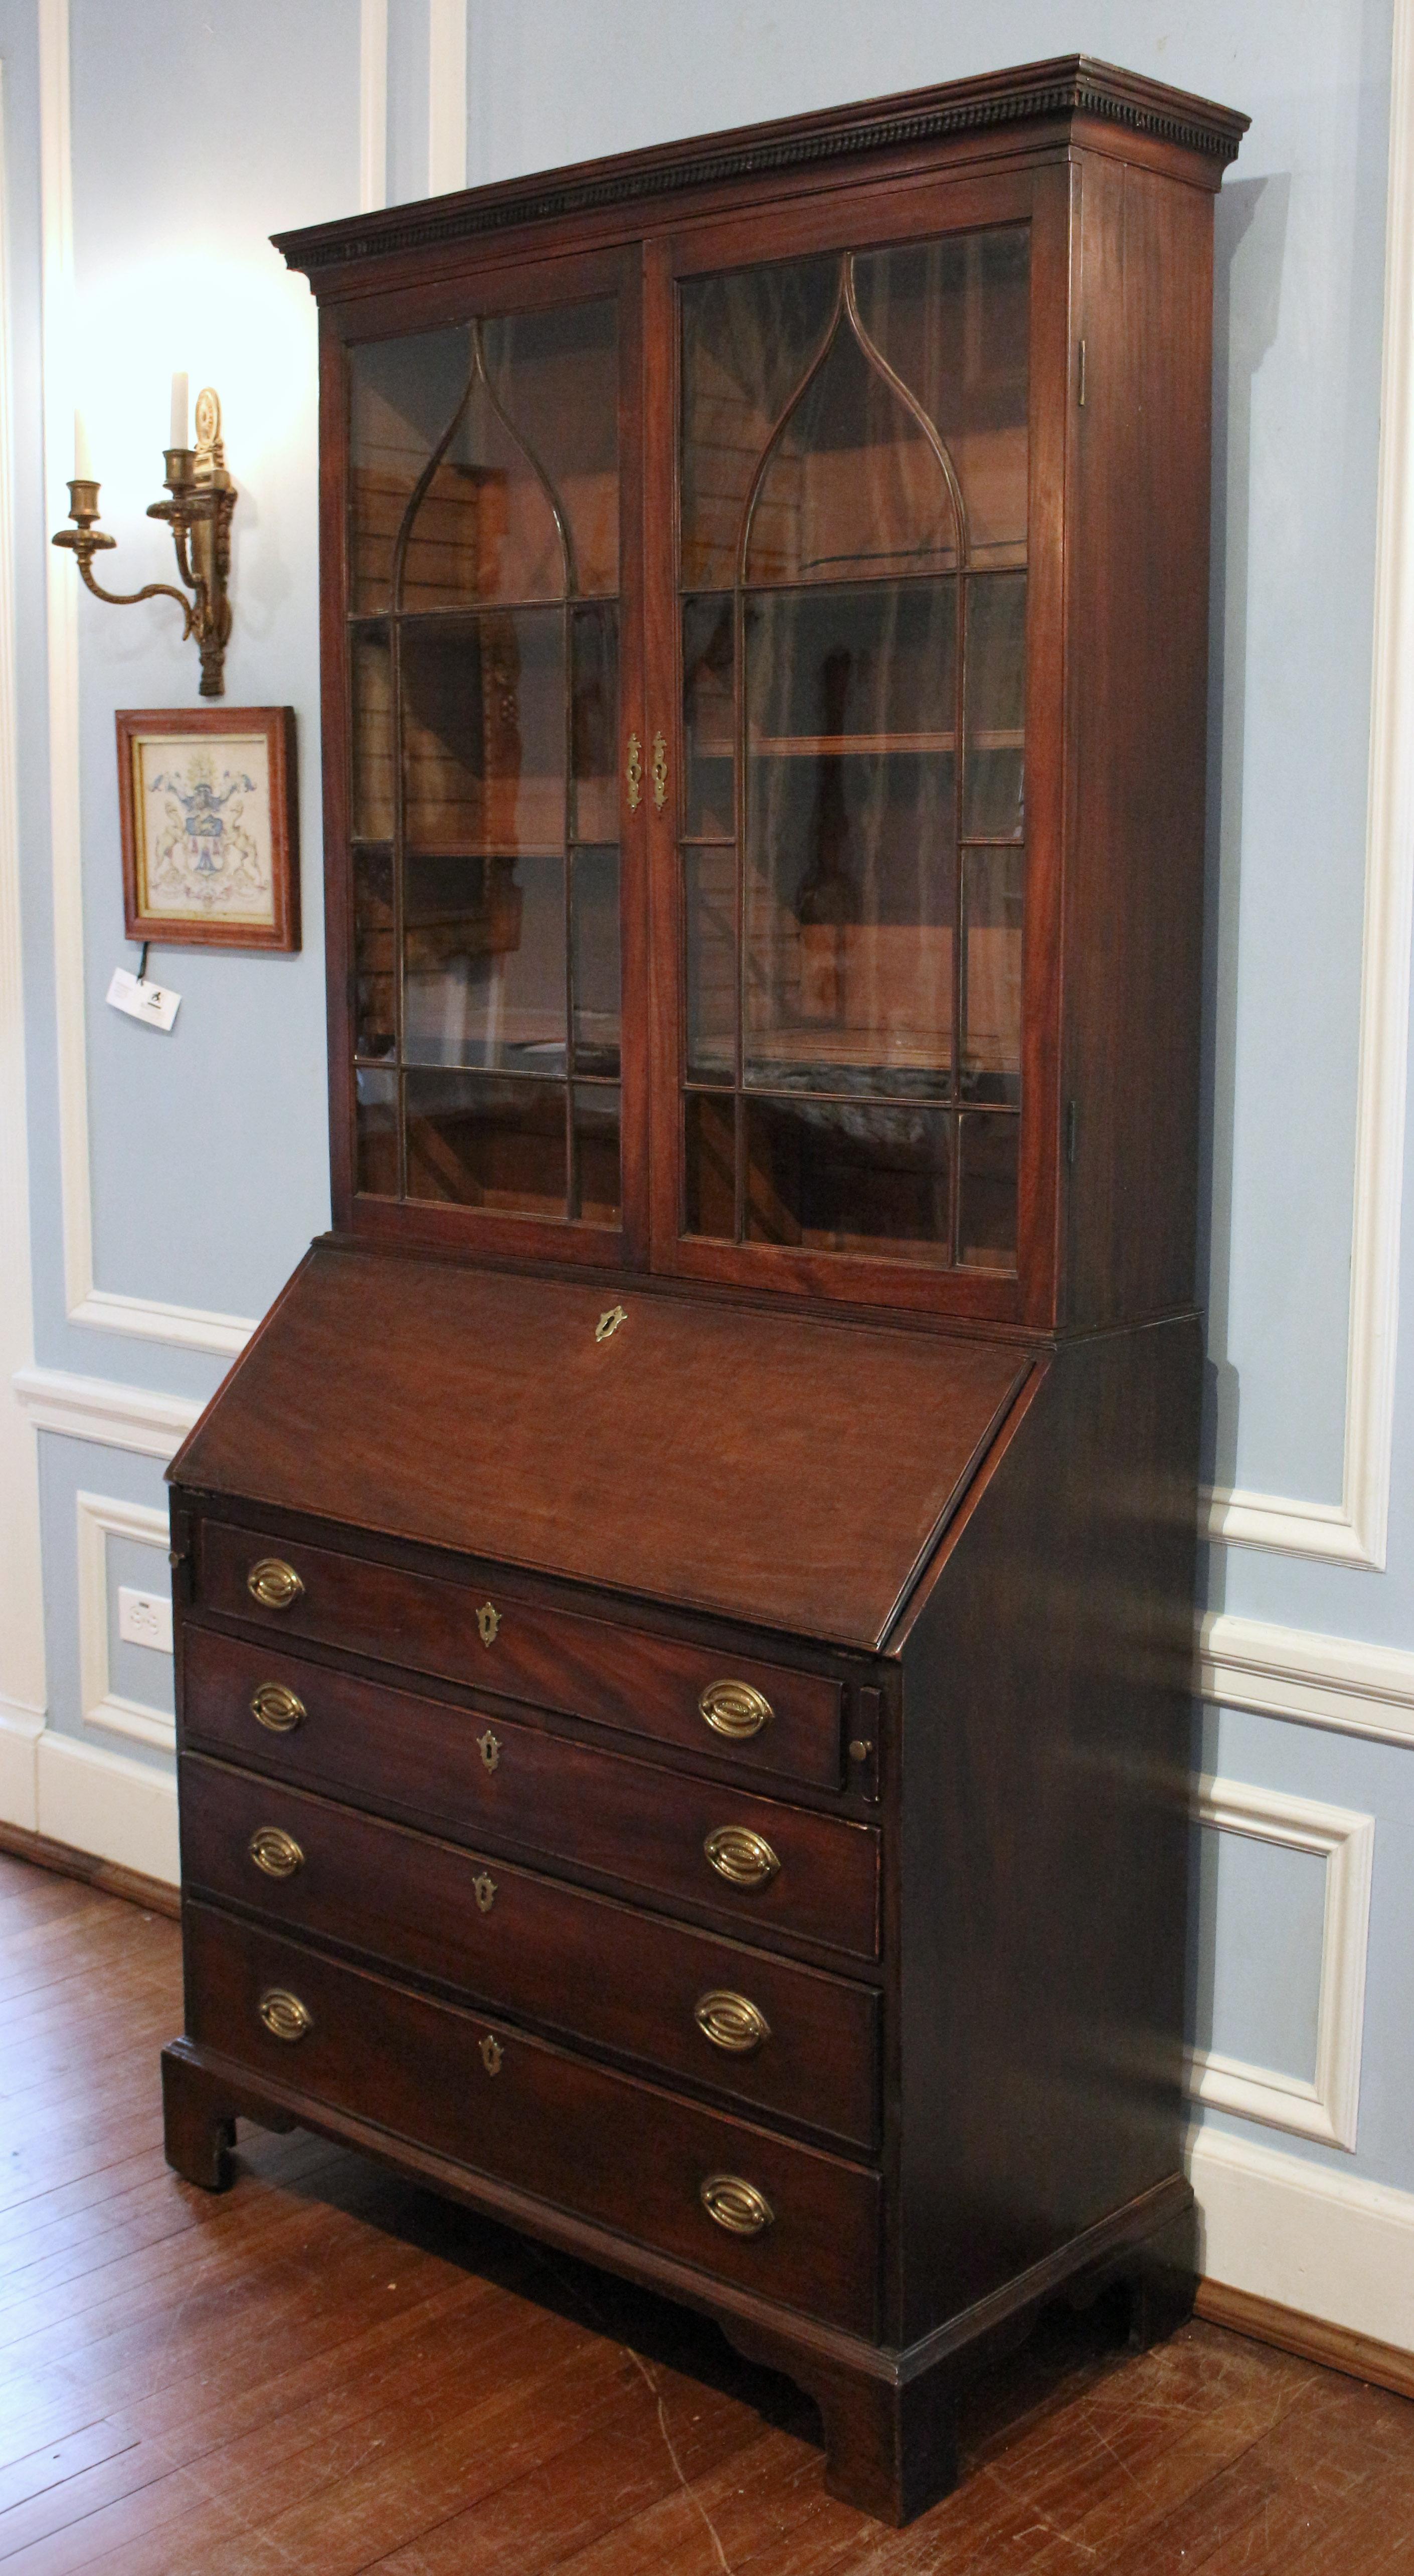 Circa 1780 George III period bureau bookcase, English. Mahogany with Gothic arched glazing (crack in one lower pane). The bookcase is divided with adjustable shelves on each side. Dentil molded crown (some 